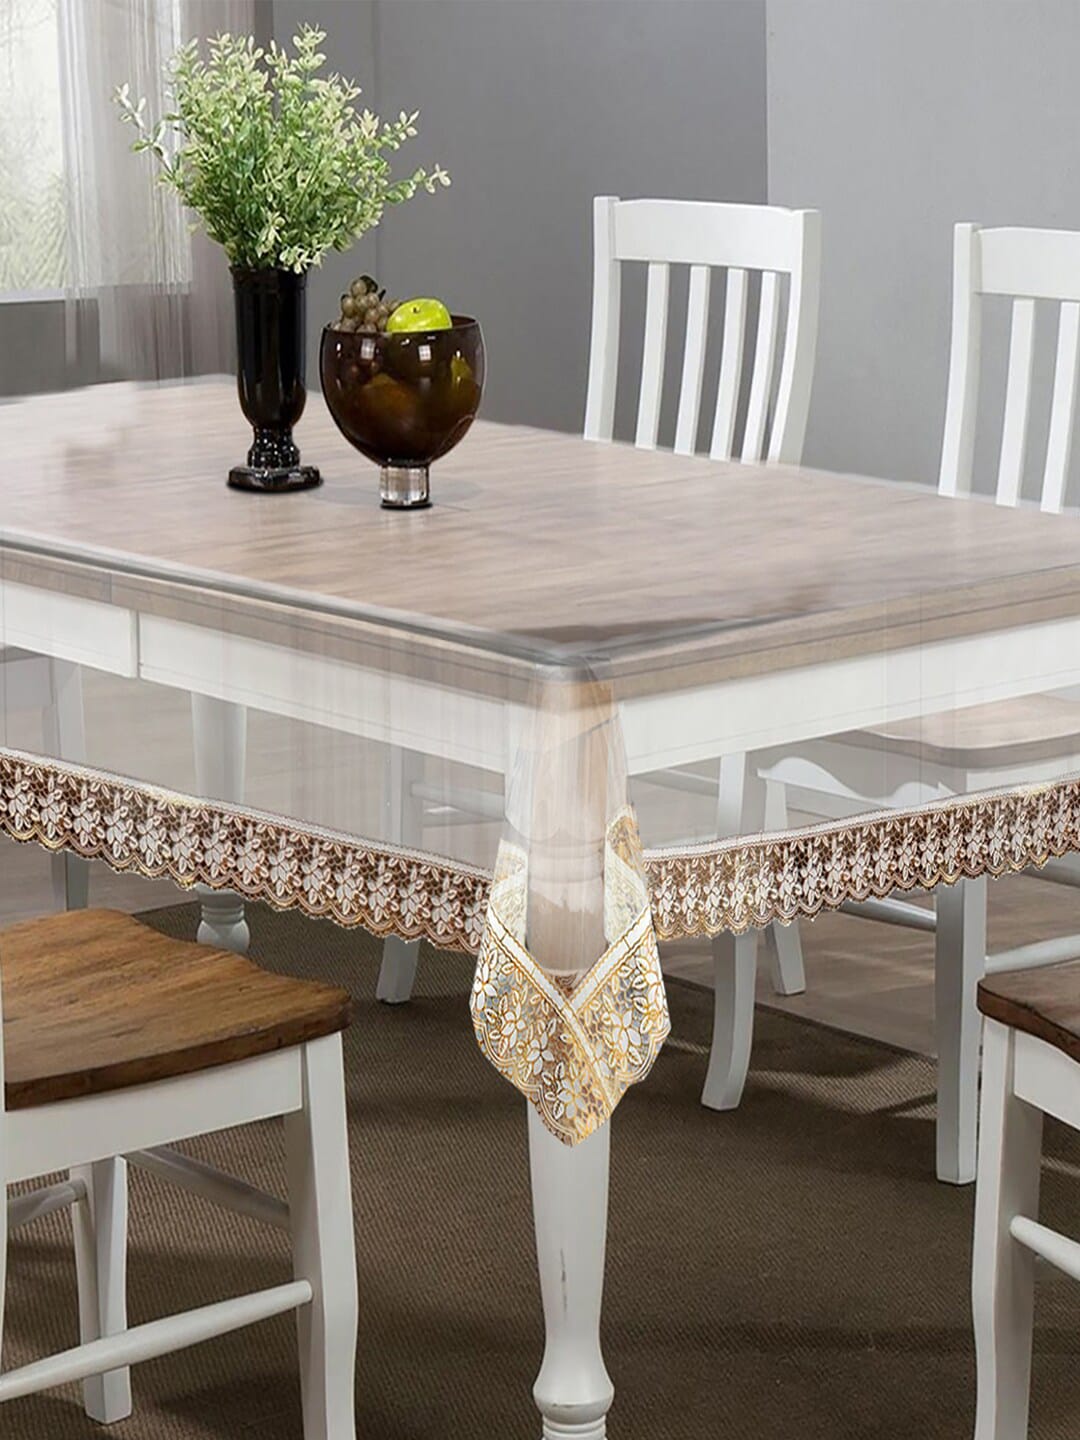 Kuber Industries Transparent & Gold-Colored Embellished 4 Seater Dining Table Cover Price in India